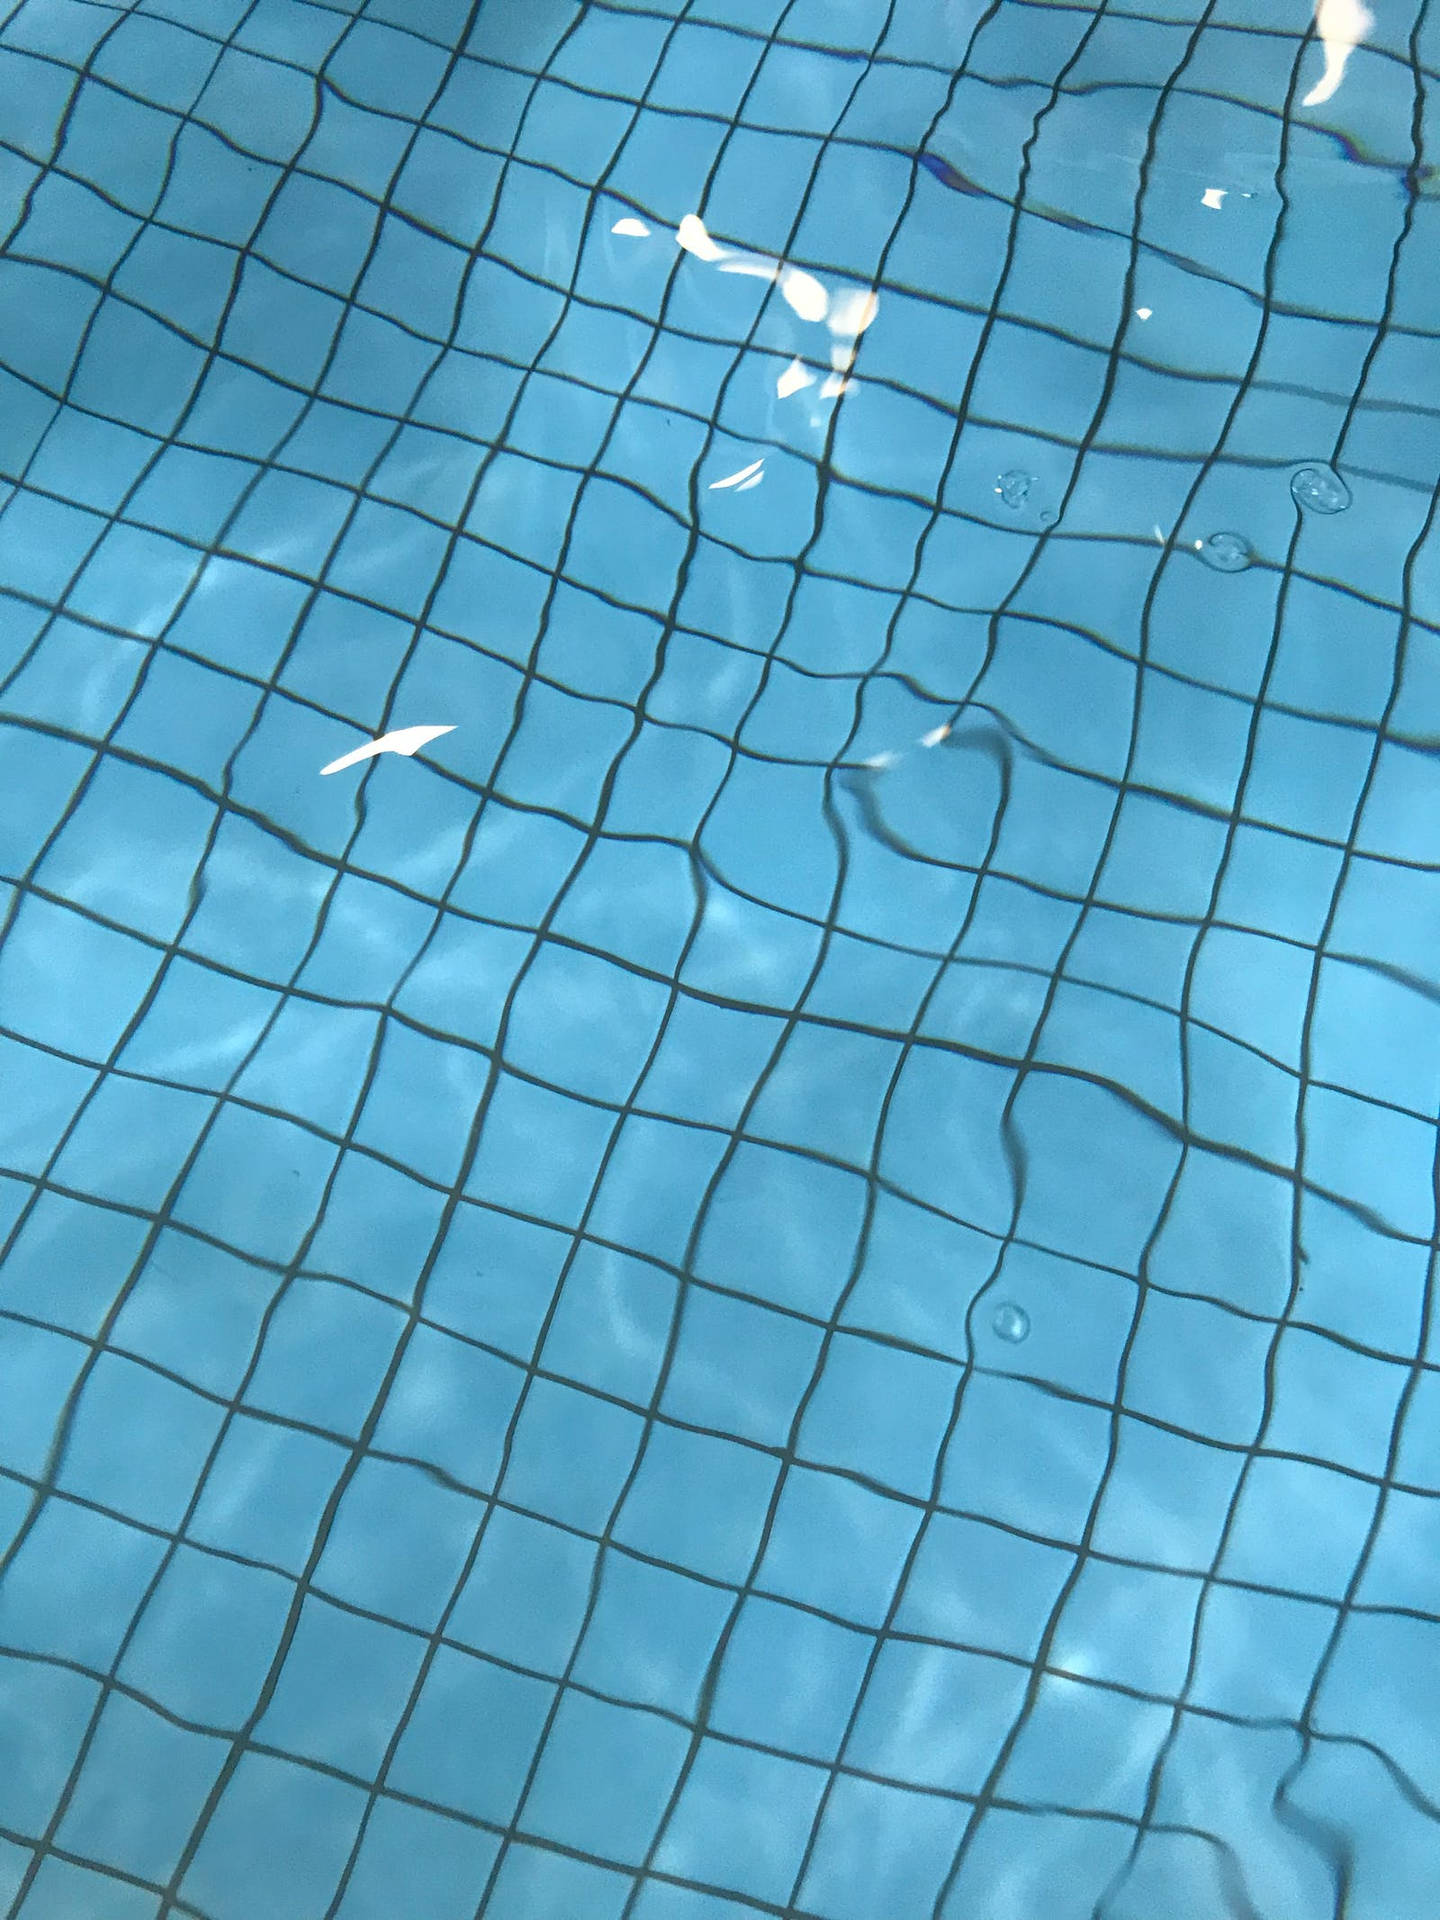 Simple Clean Swimming Pool Background